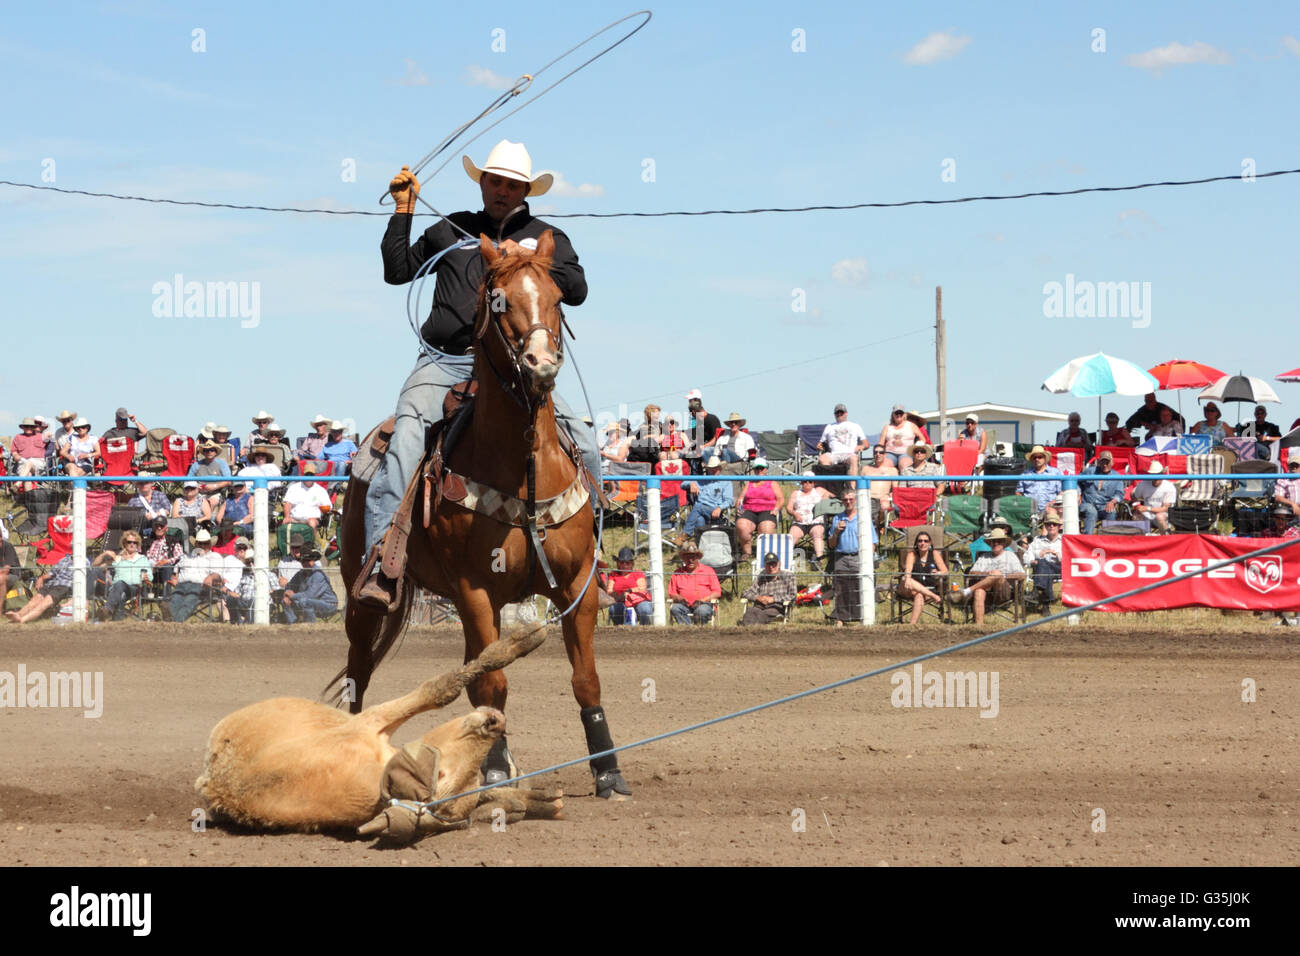 Cowboy in team-roping event in a rodeo in Alberta, Canada. Stock Photo